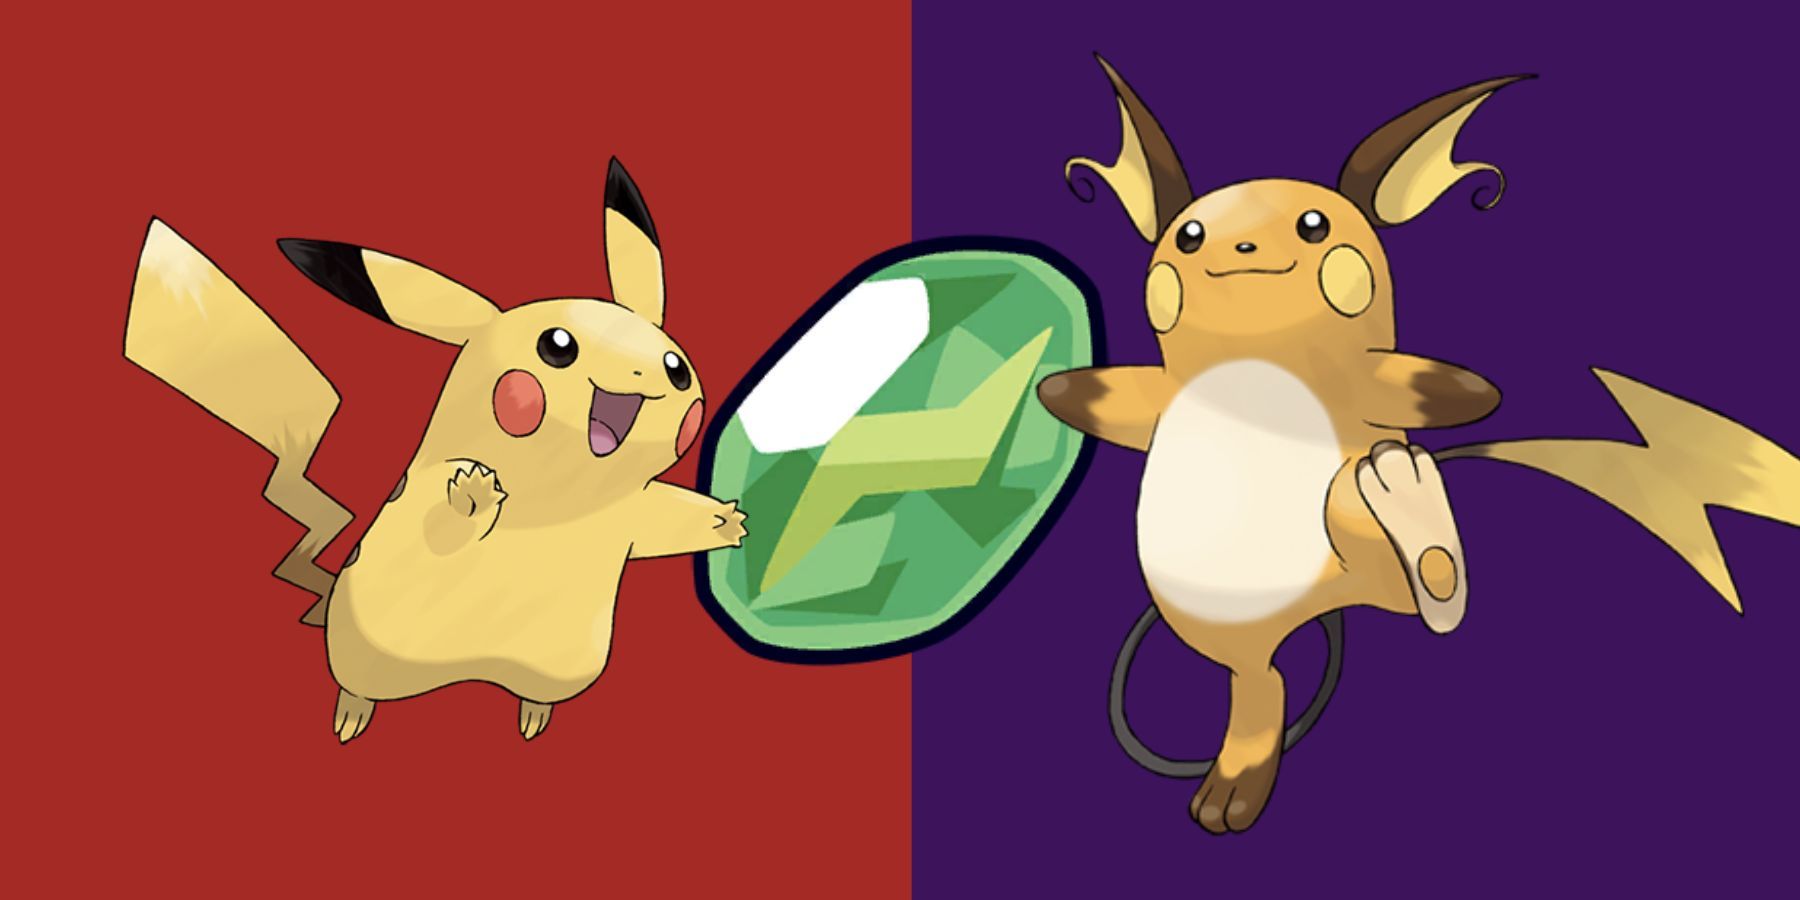 Should I Evolve one of these Pikachu (and, if so, which one?) or